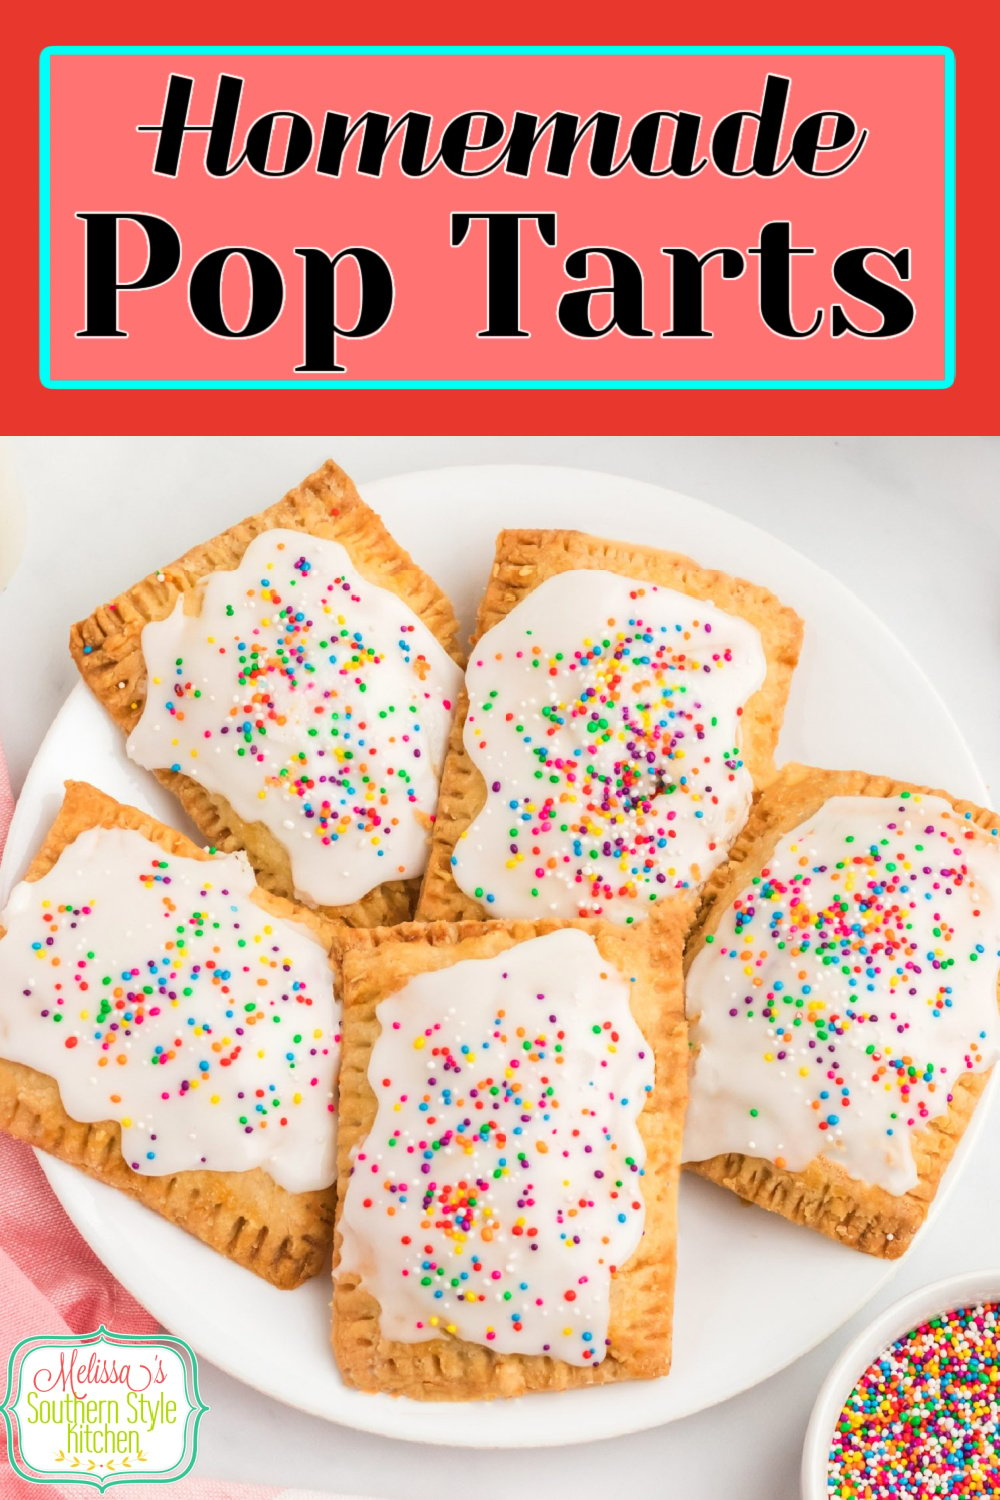 Make your own scratch made Homemade Pop Tarts recipe filled with strawberry preserves for breakfast, brunch and snacking #poptarts #homemadepoptarts #breakfastpastries #strawaberrypoptarts #poptartsrecipes #easypoptarts #poptartsflavors #strawberry via @melissasssk